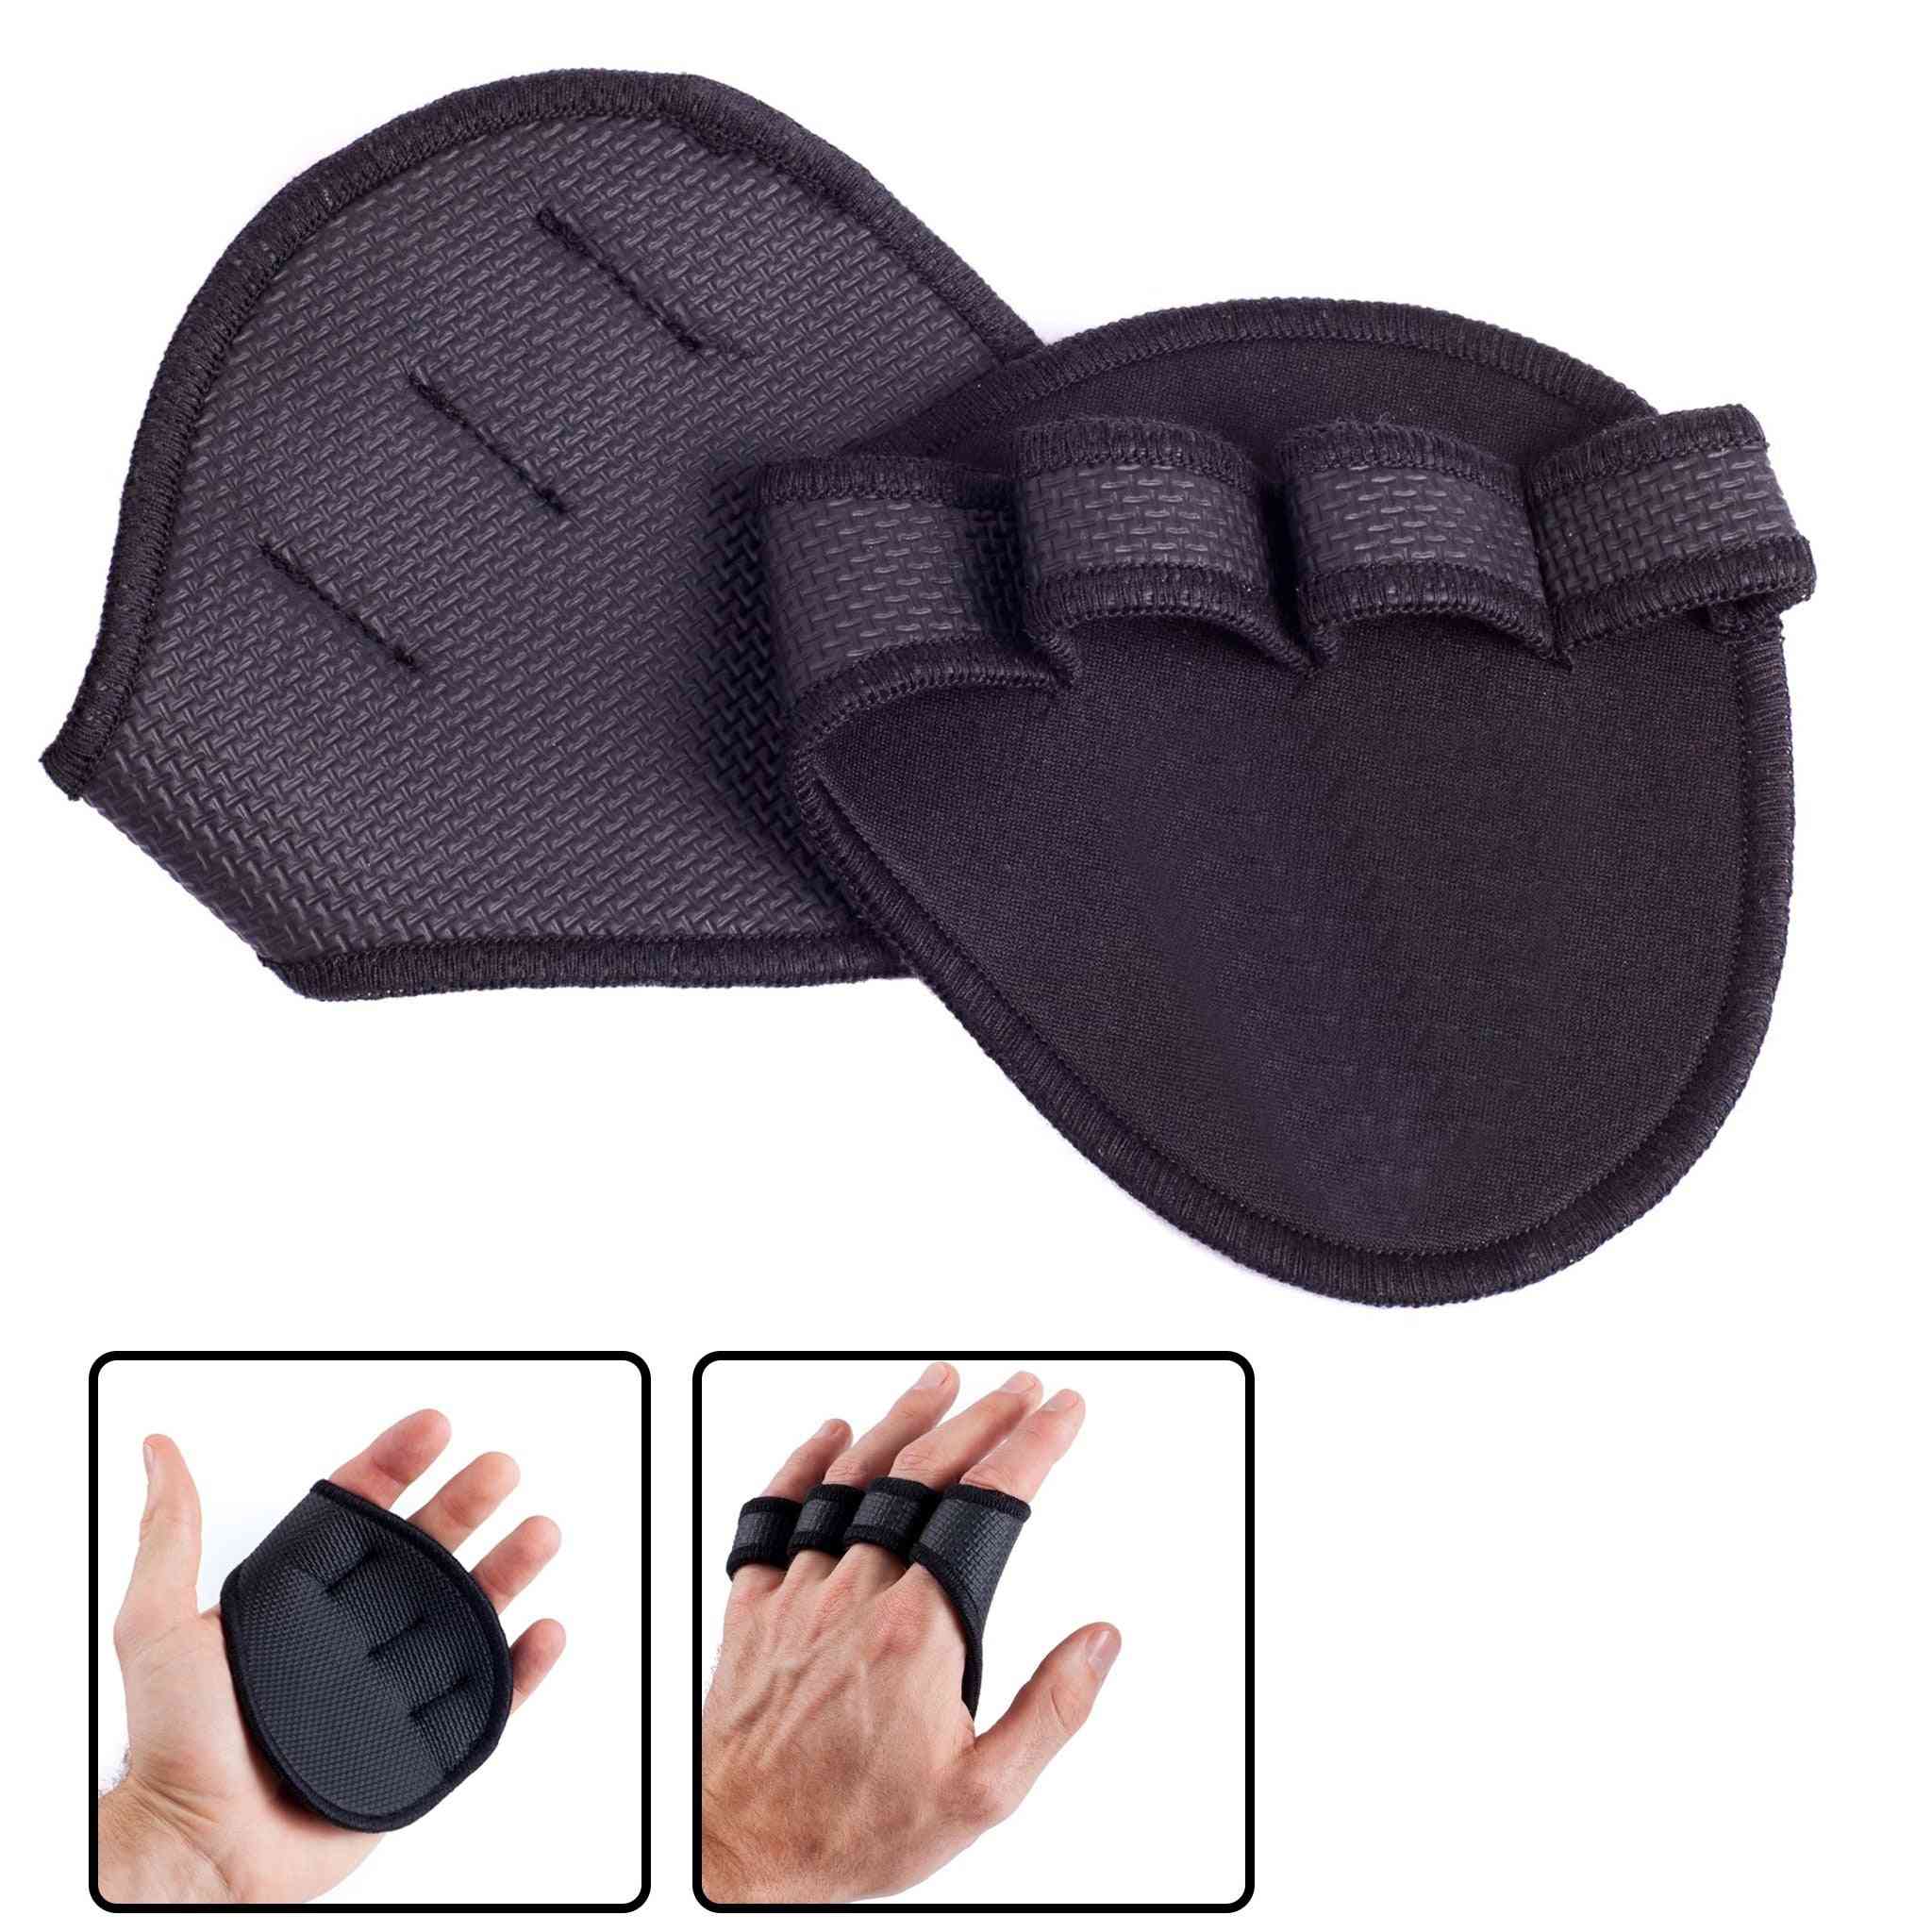 Anti-skid Weight Cross- Lifting Palm Dumbbell, Gloves Grips Pads